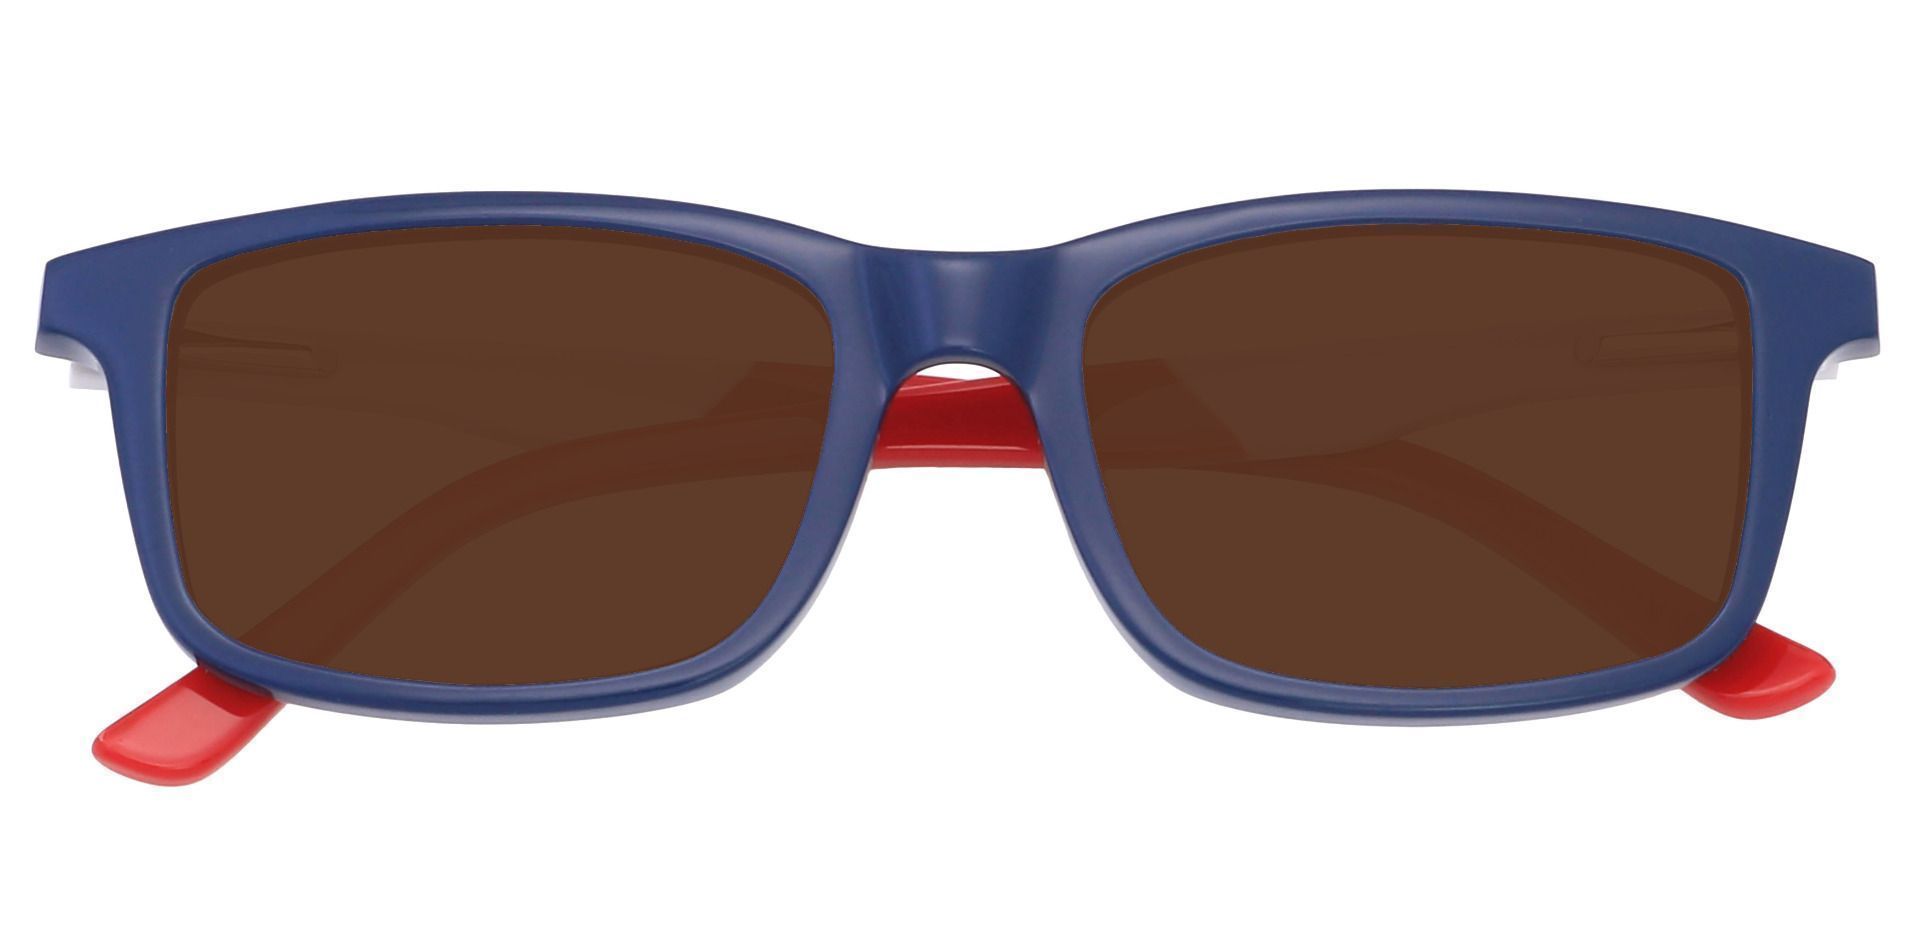 Hub Rectangle Reading Sunglasses - Blue Frame With Brown Lenses